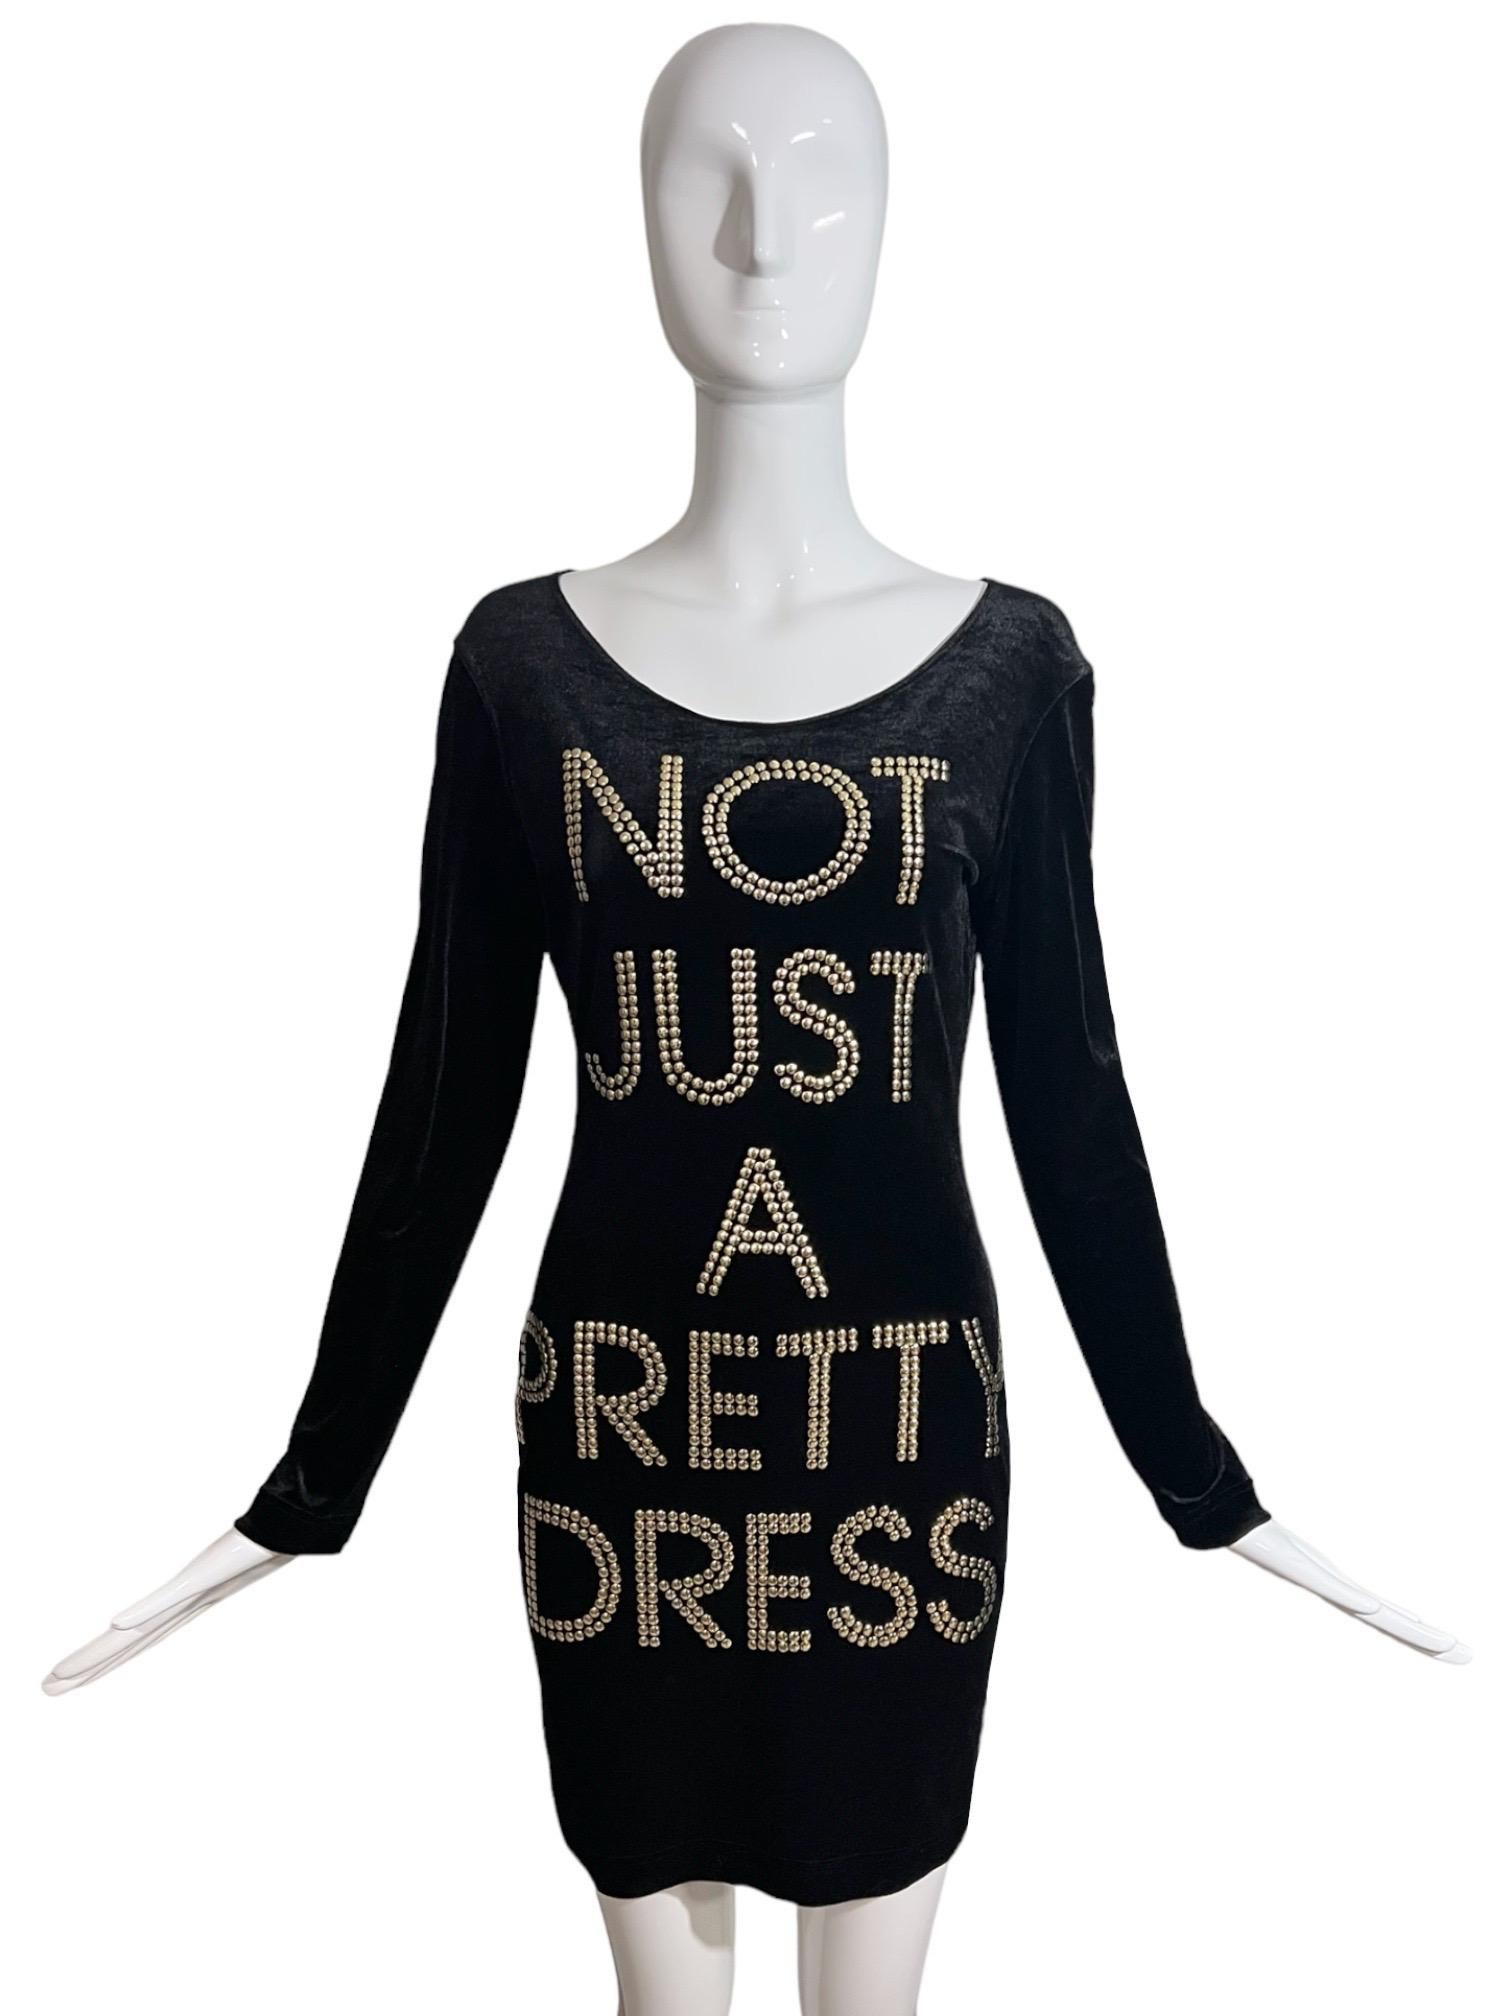 Moschino Cheap and Chic 1990's black velvet form fitting dress with a whimsical quote studded on the front stating 